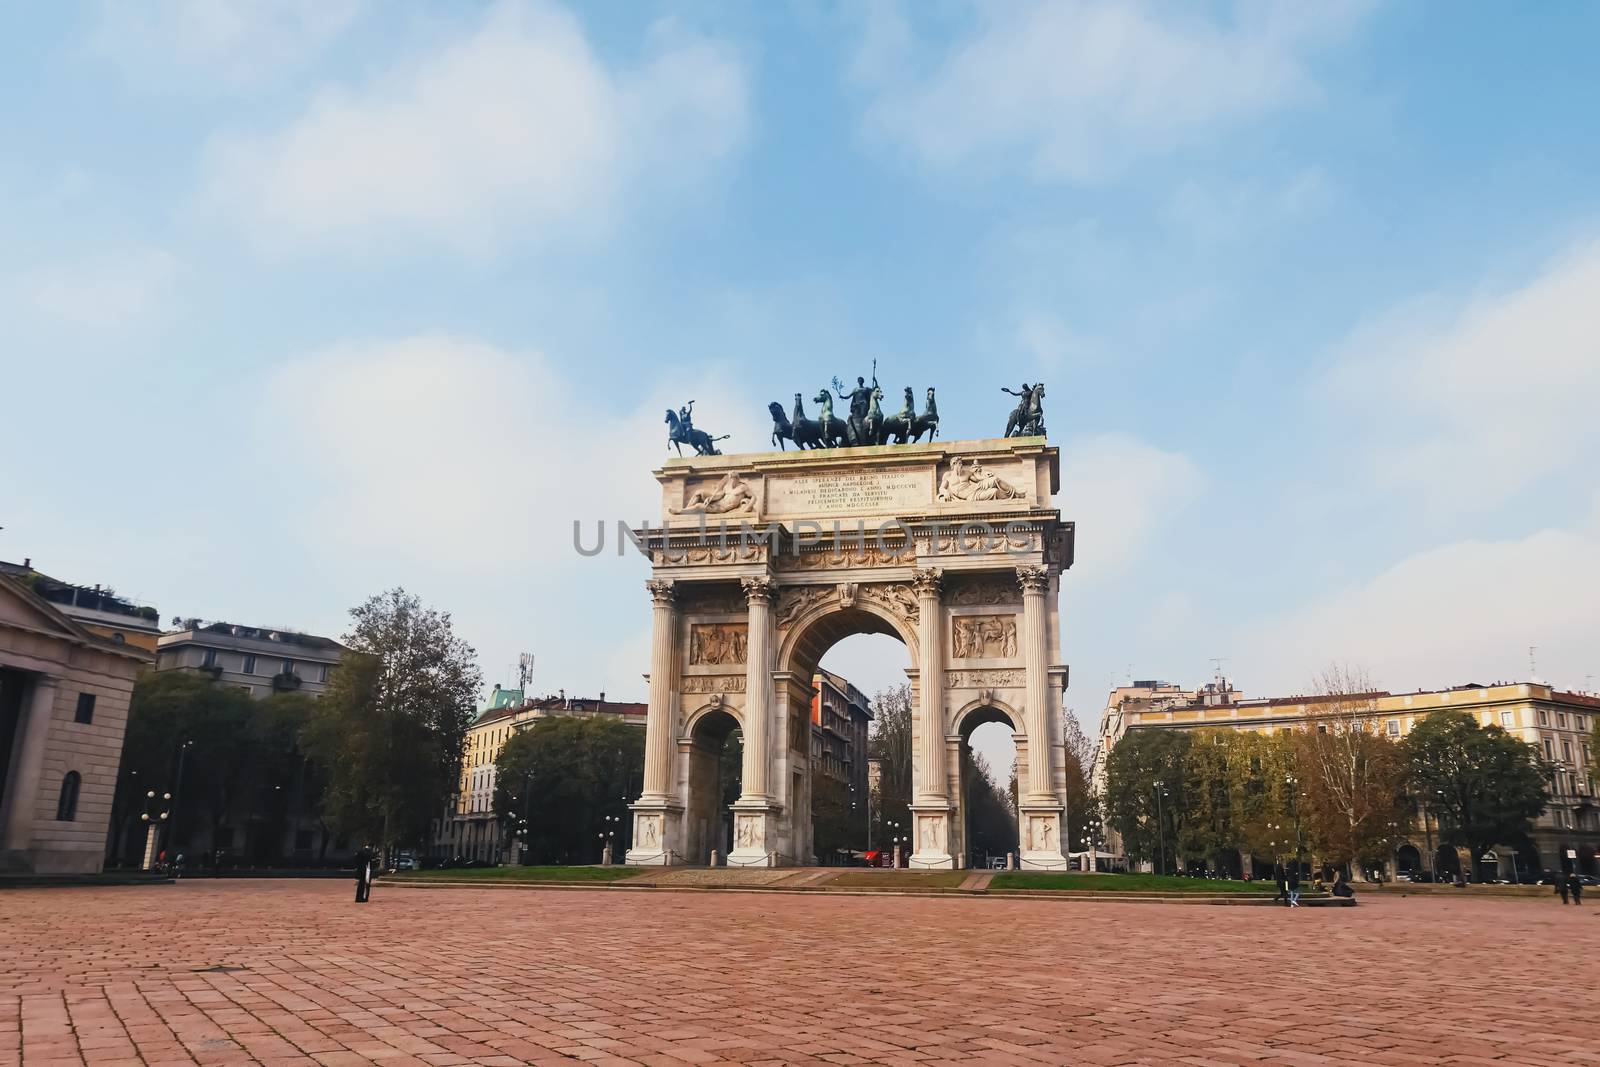 Triumphal arch called Arco della Pace means The Arch of Peace in Porta Sempione district in Milan, Lombardy region in Northern Italy at sunset